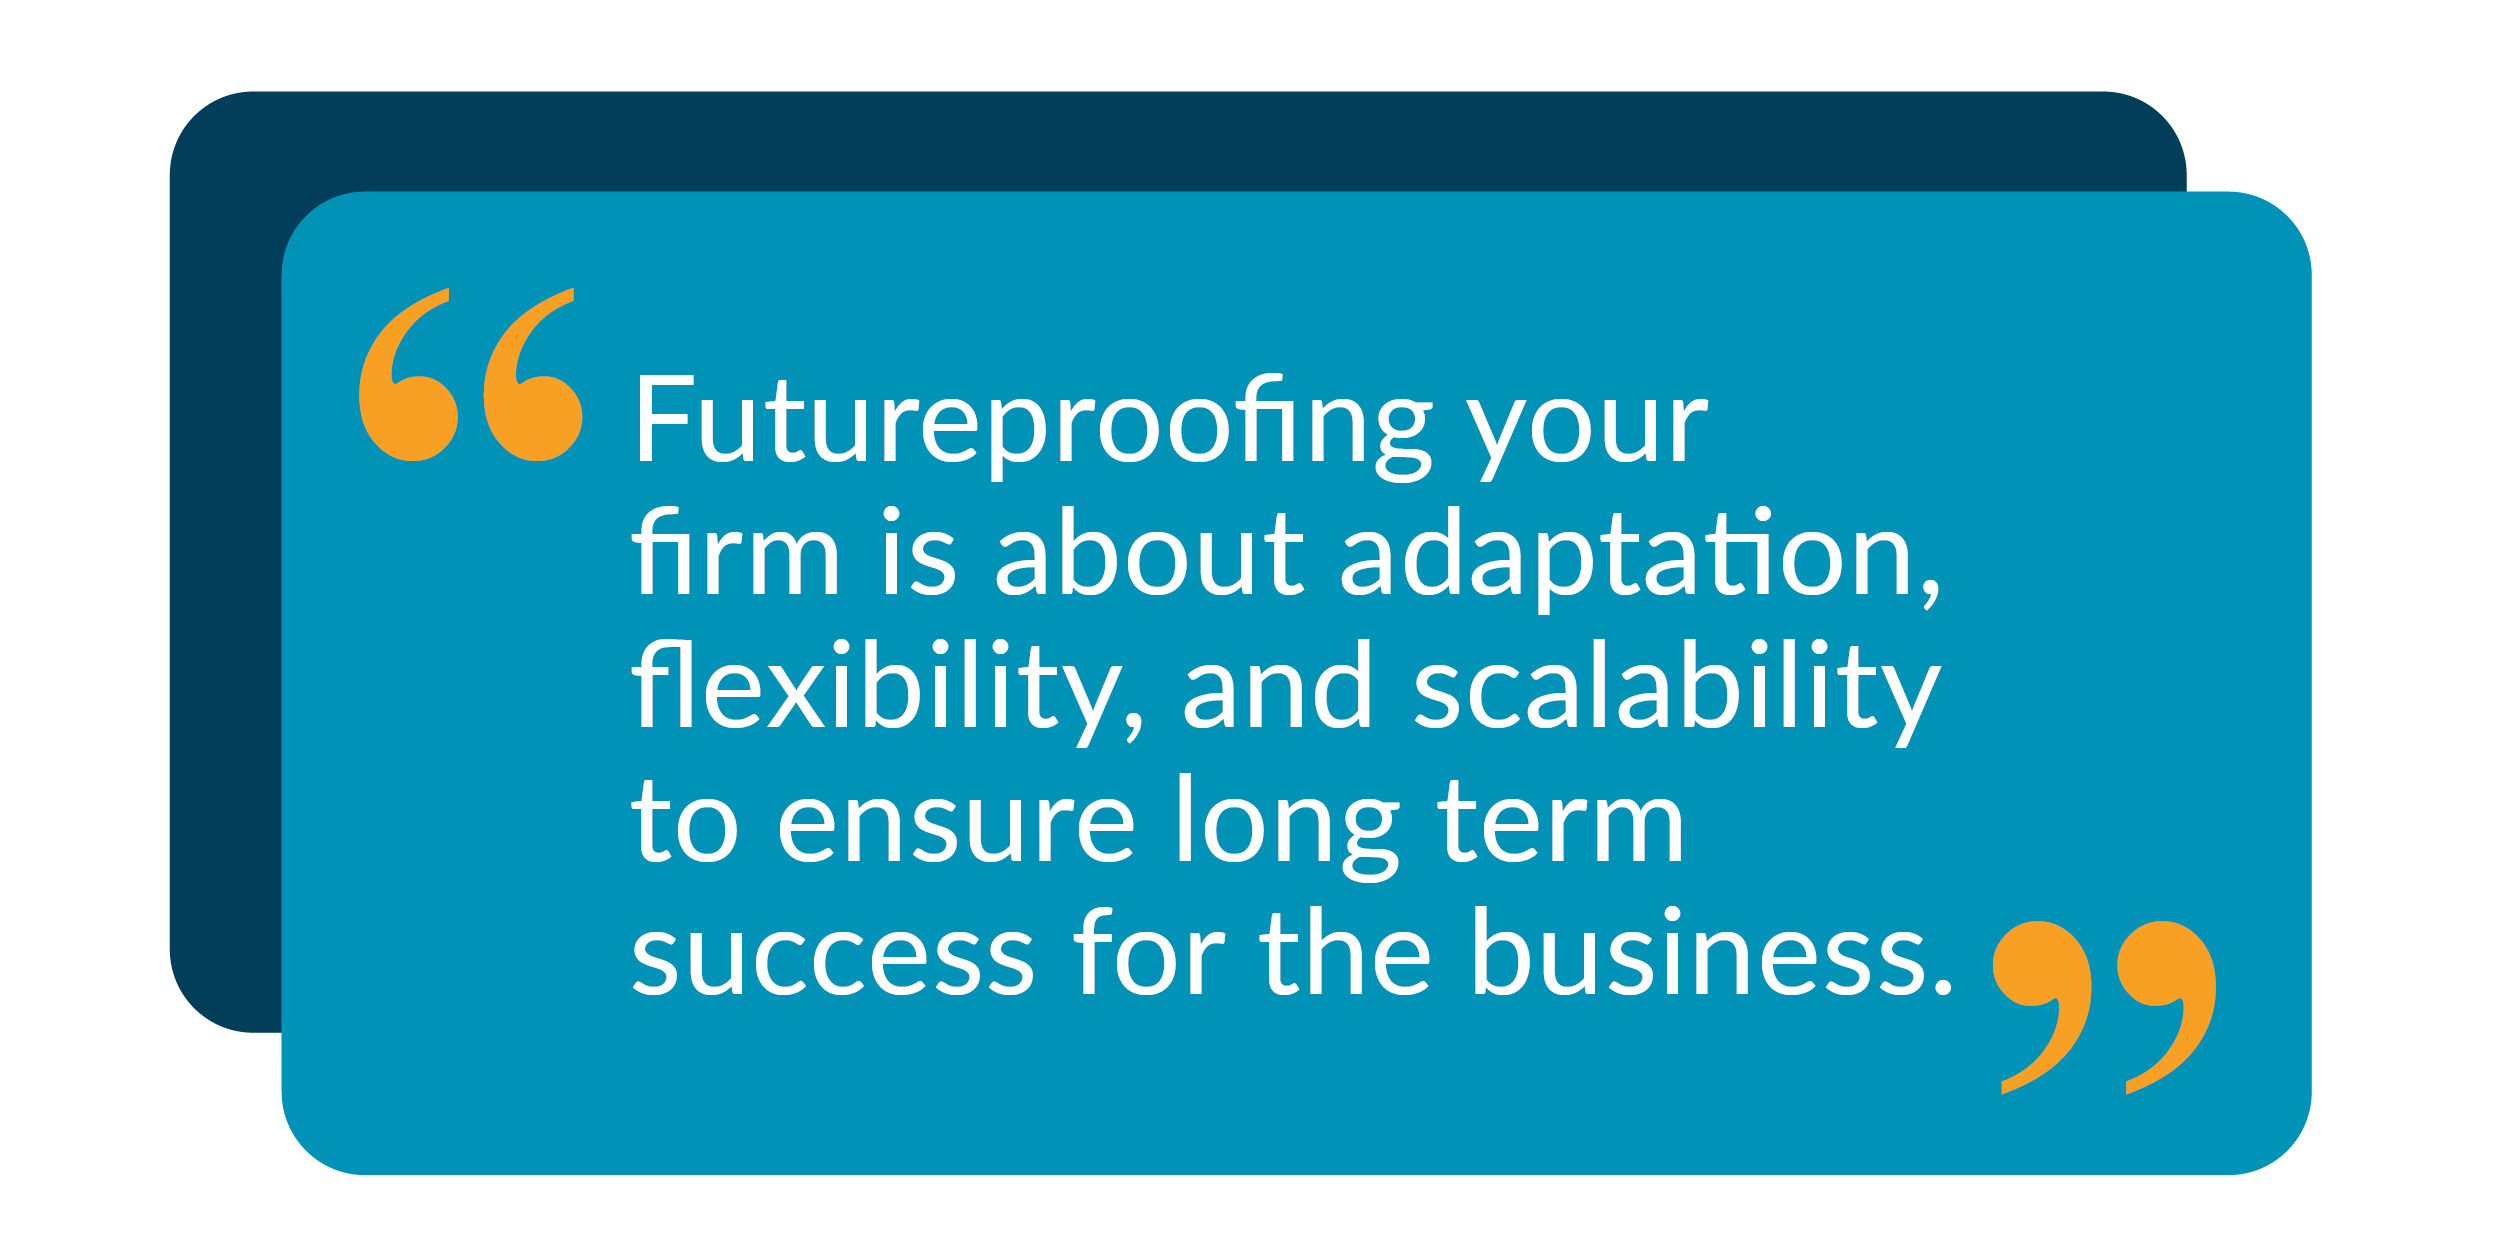 quote about futureproofing for law firms on blue background